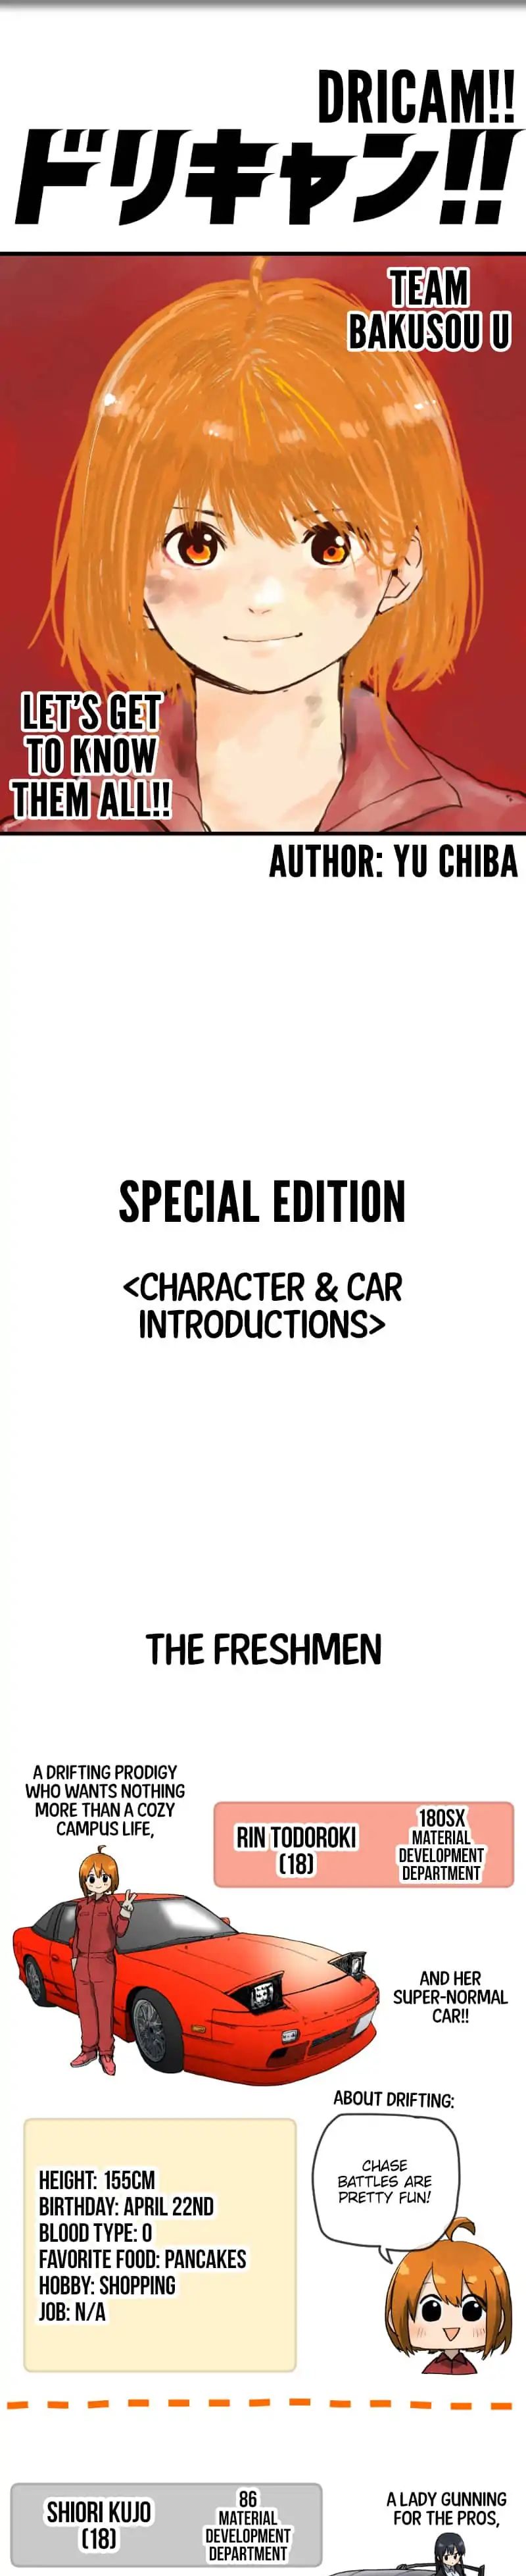 Dricam!! Special Edition: Characters and Car Introductions